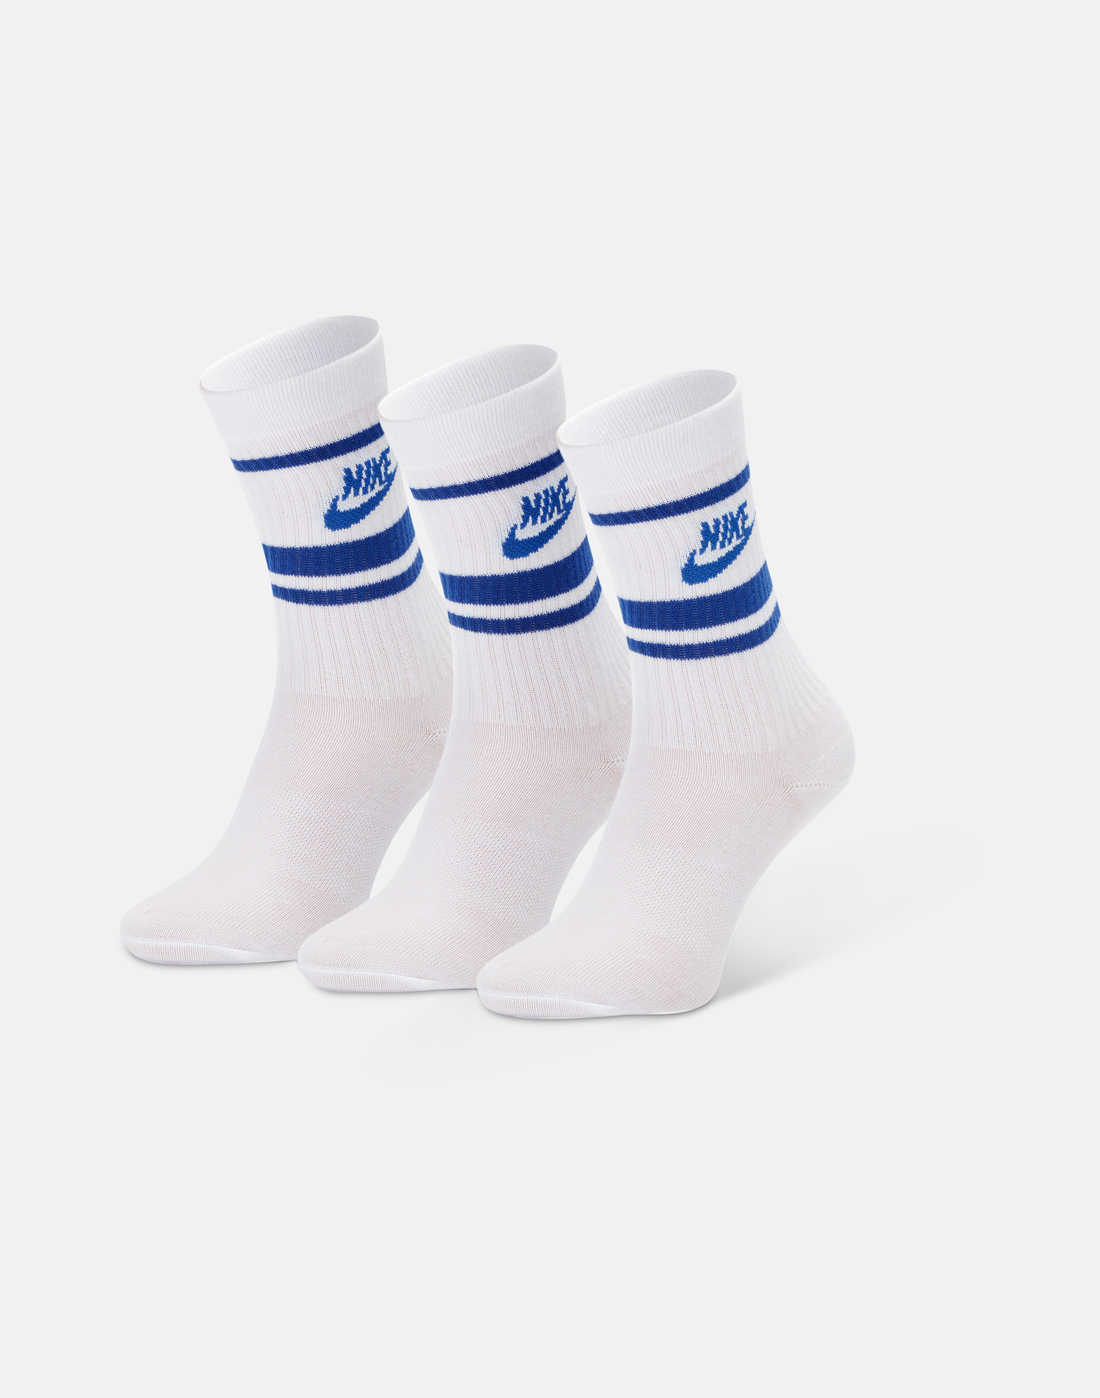 Nike Essentials 3 Pack Crew Socks - White | Life Style Sports IE